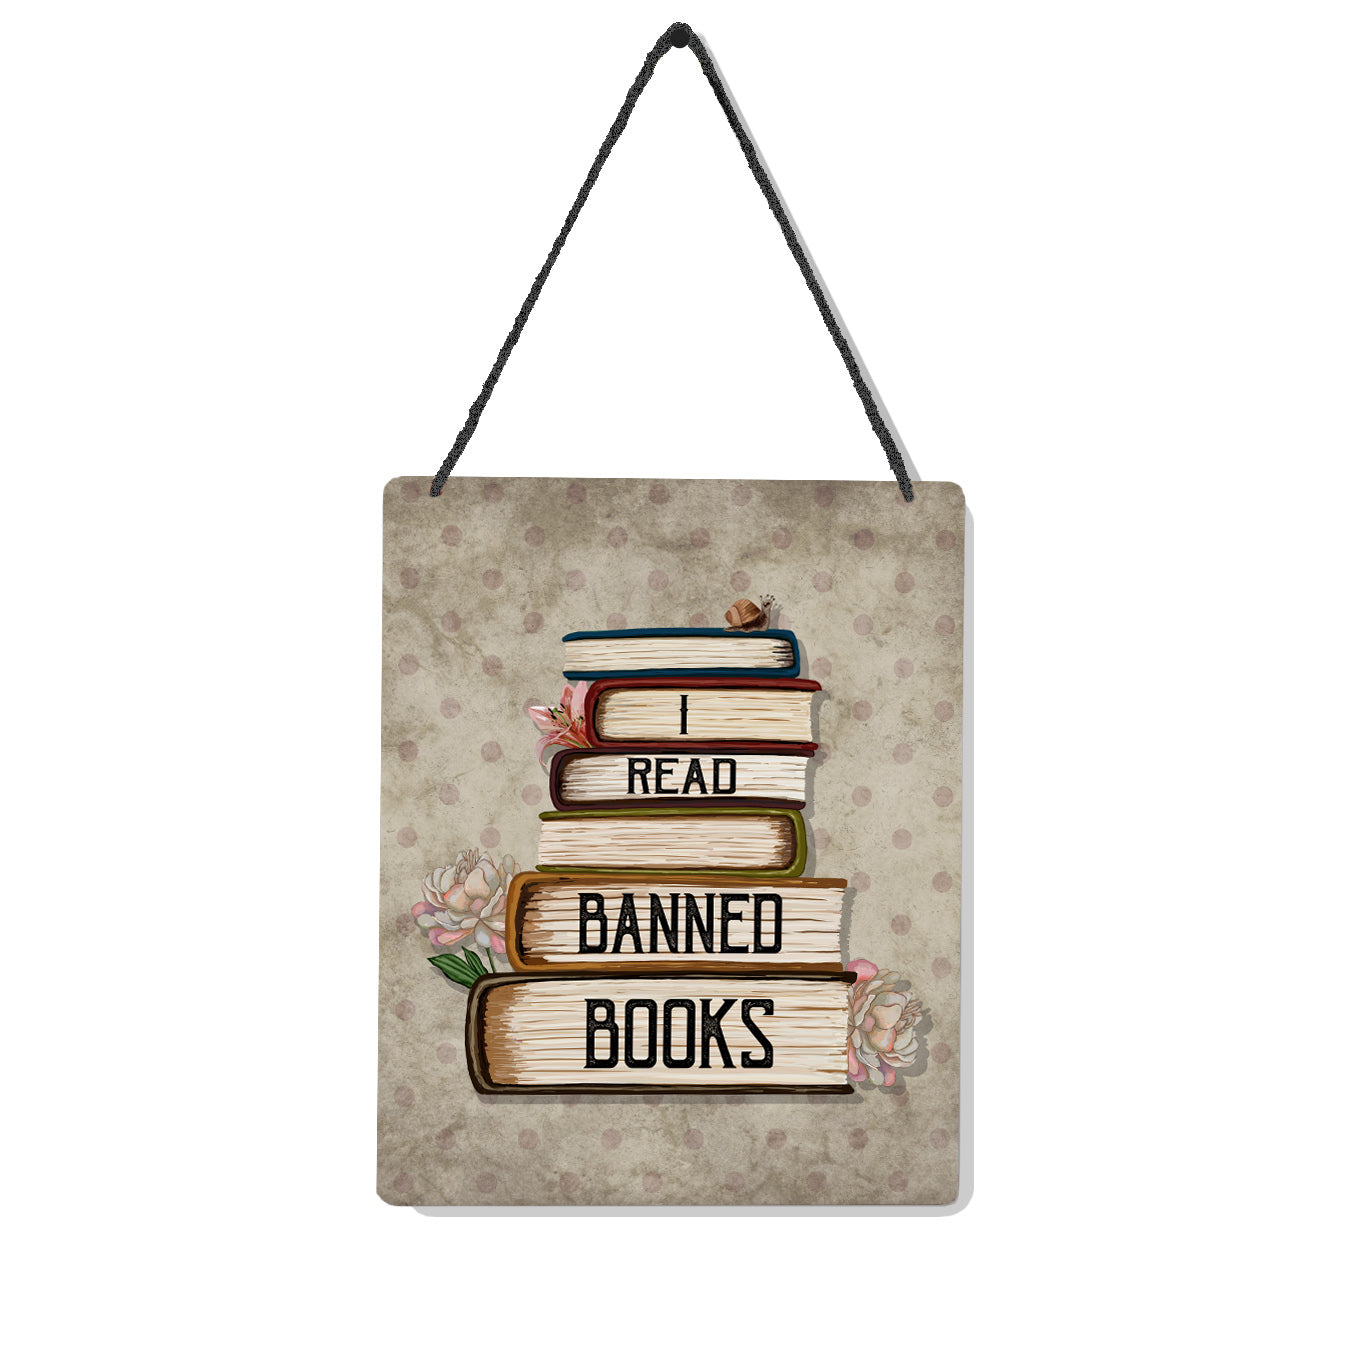 Banned Books 4x5